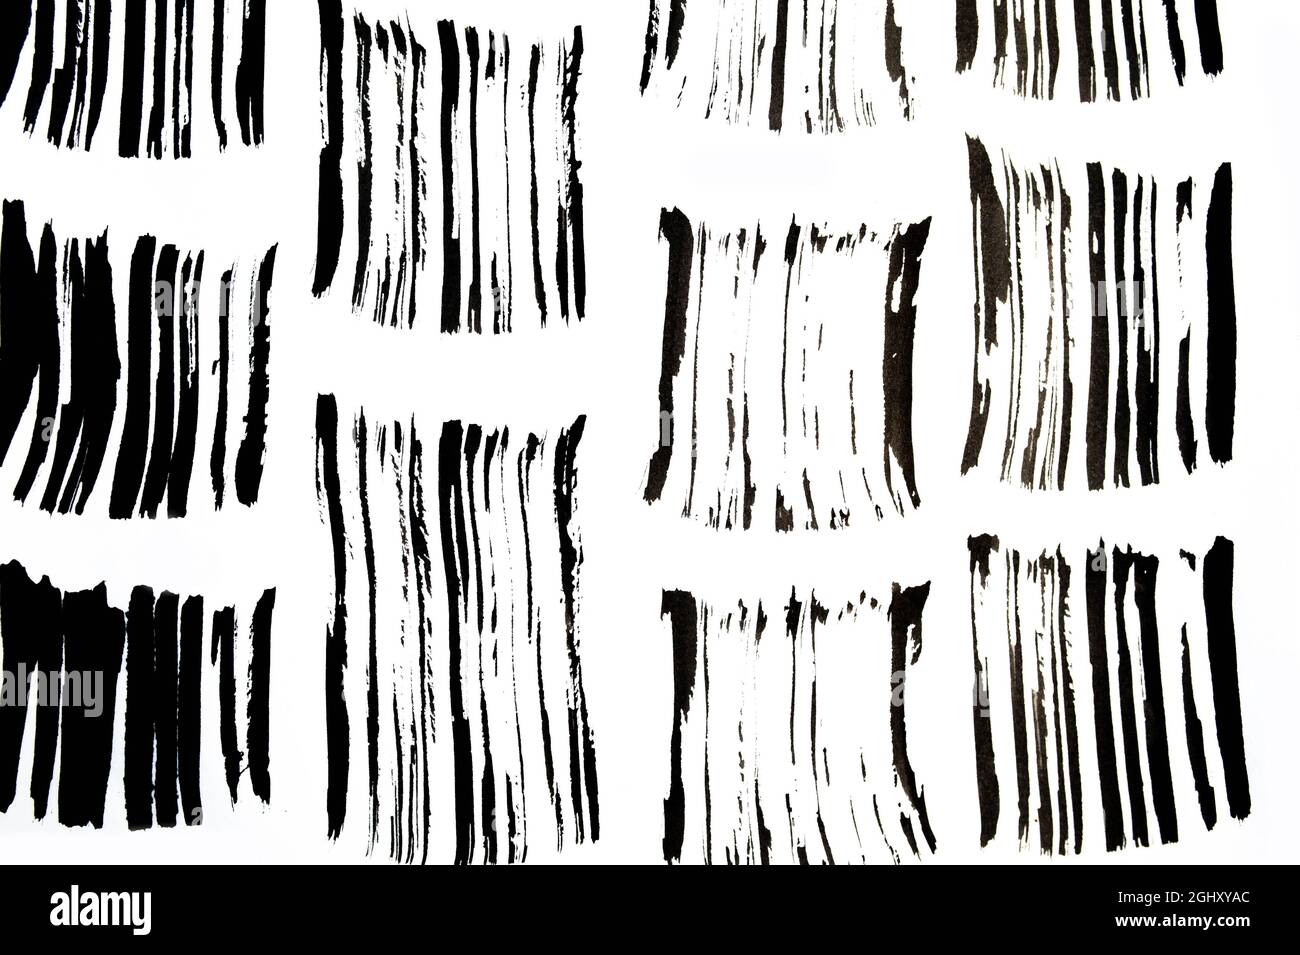 Black abstract brush strokes pattern and splashes of paint on paper. Grunge art calligraphy background texture Stock Photo